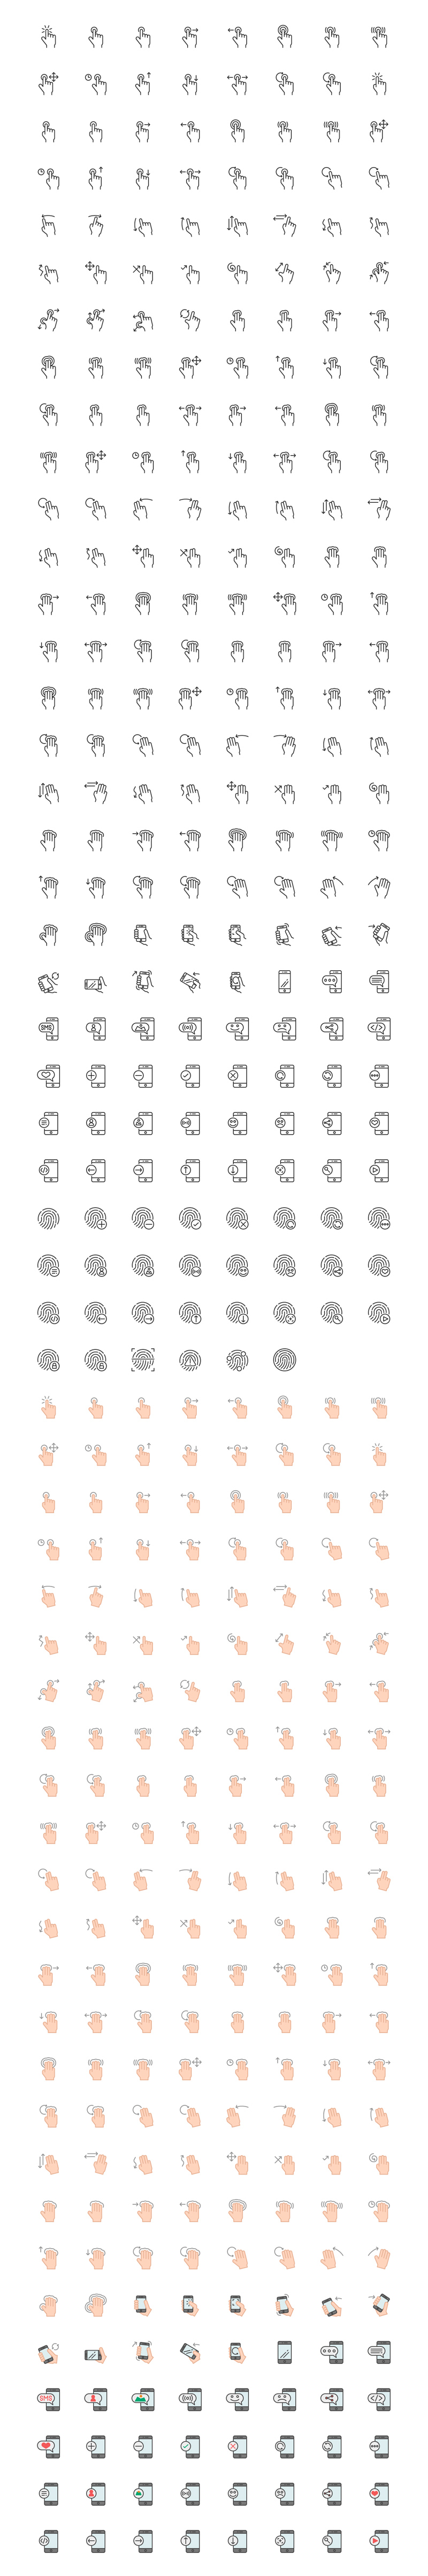 Unicolor svg #2, Download drawings